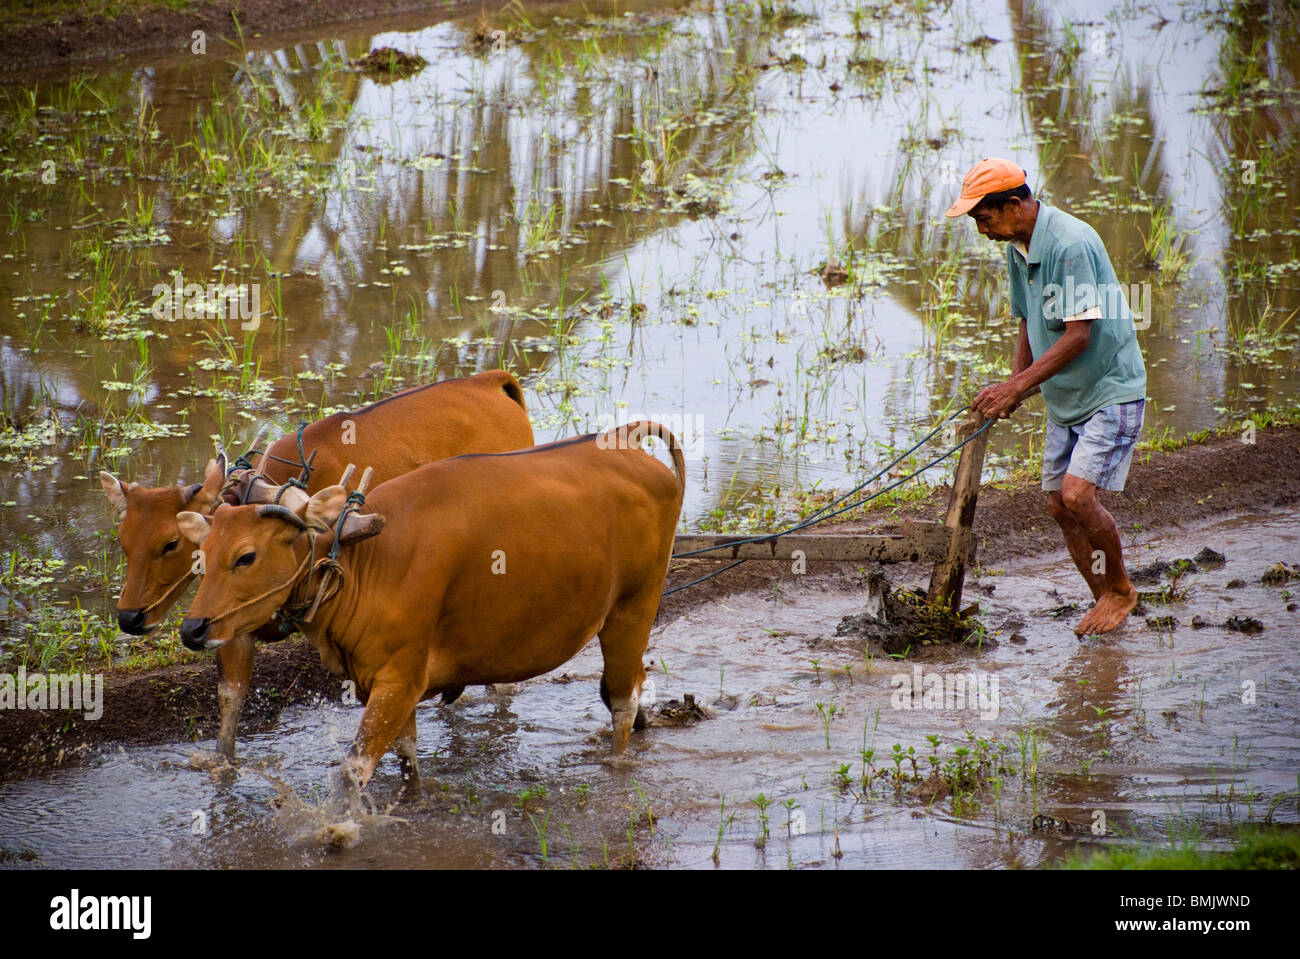 Rice fields in Bali, Indonesia, are still plowed by cows. Work begins early and continues all day. An eco frienldy way to farm. Stock Photo